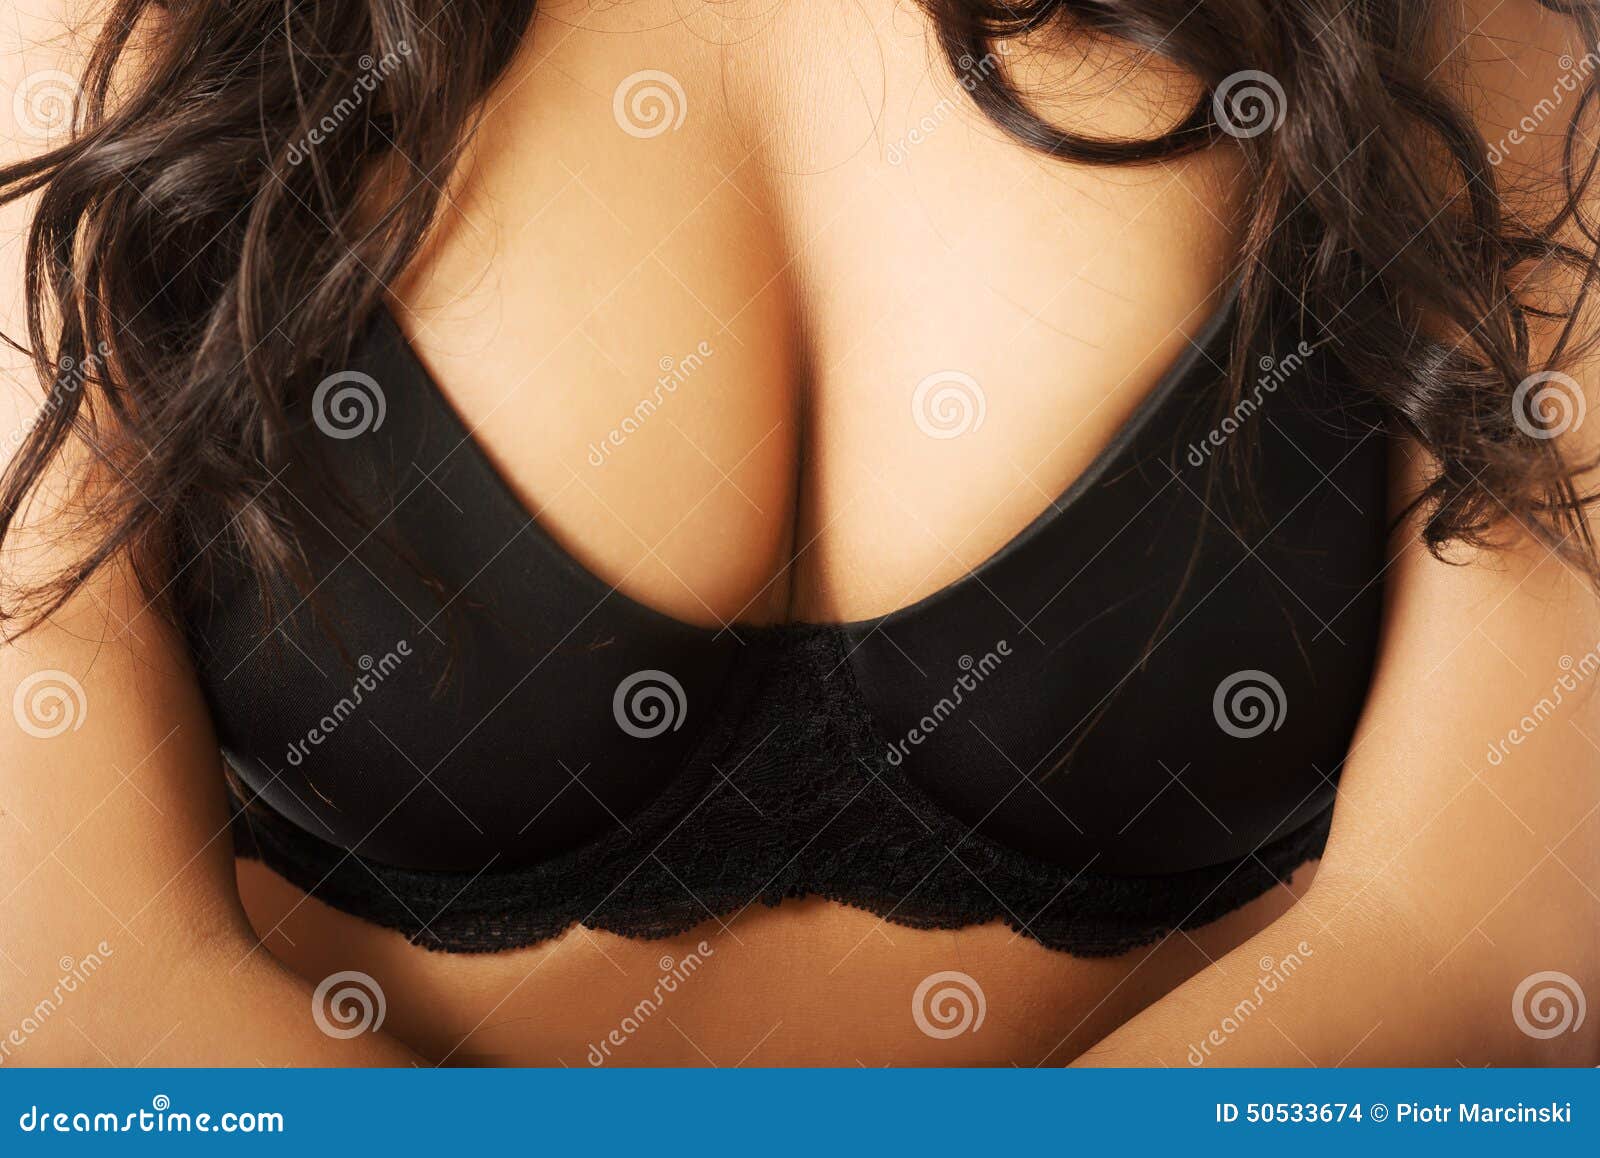 Close Up on Female Boobs in Black Bra Stock Photo - Image of